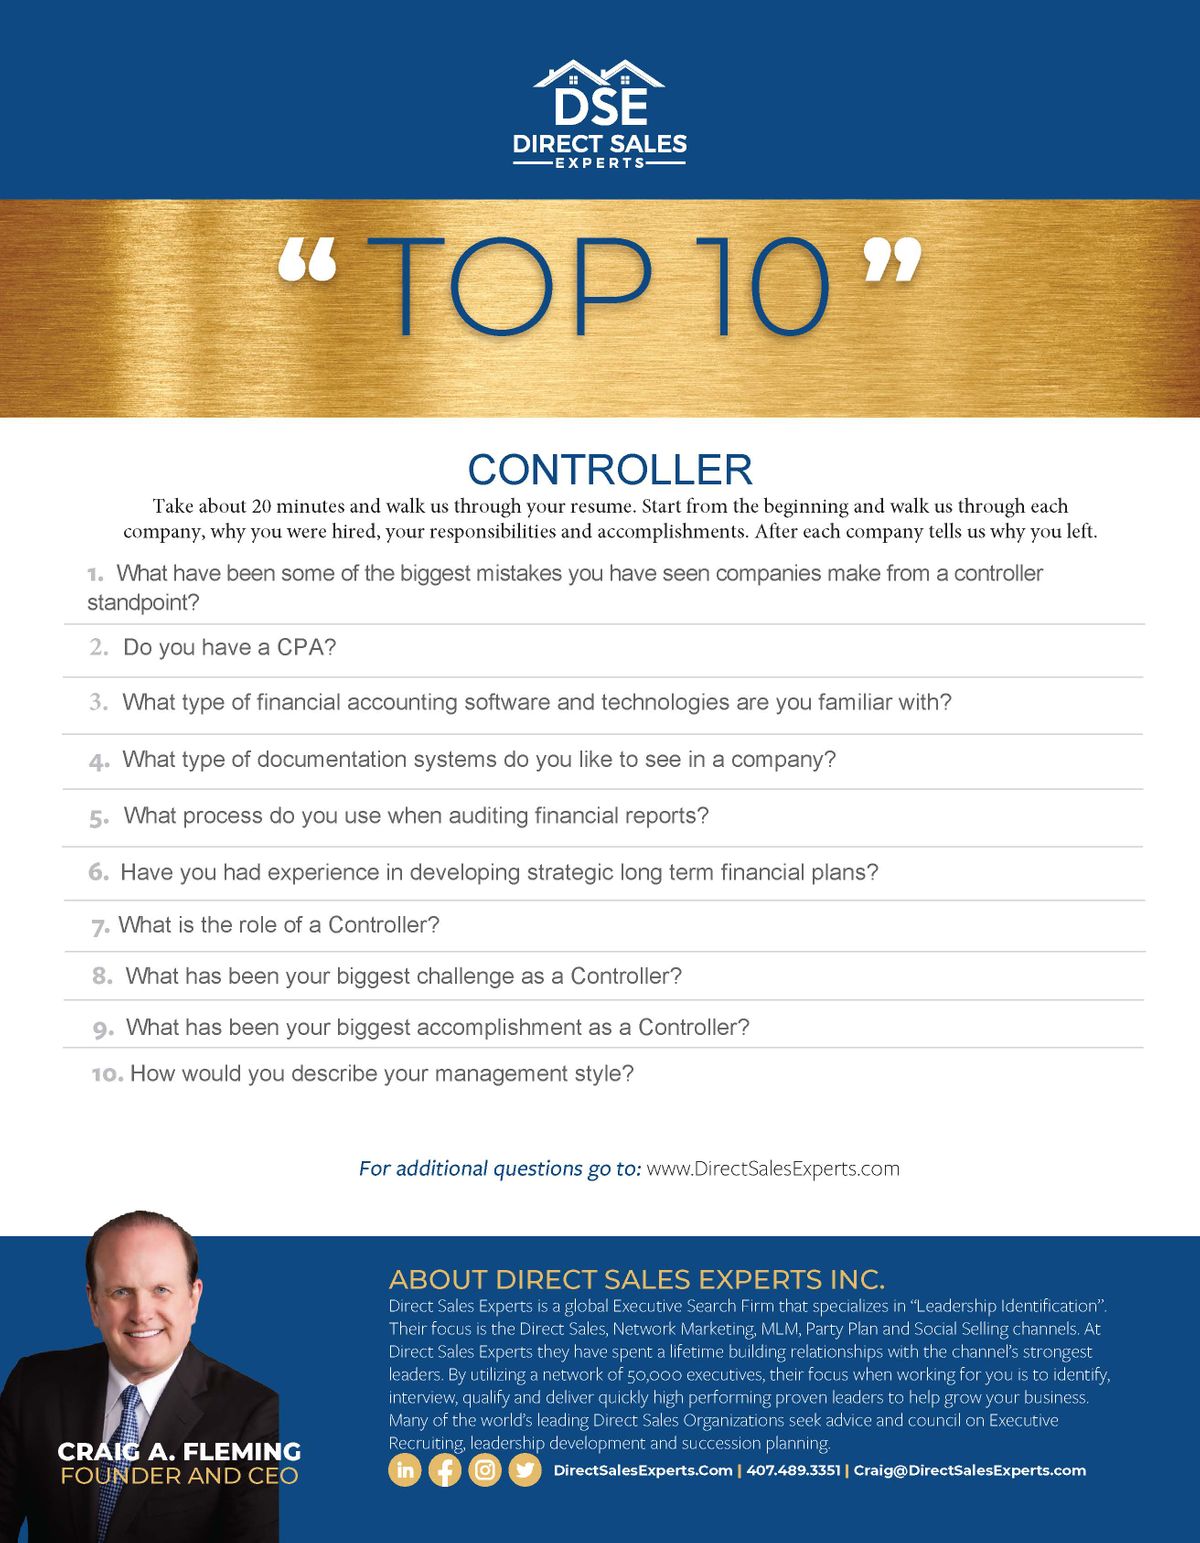 DirectSalesExperts_Top10-Controller-JPEG_Page_1 (1).jpg